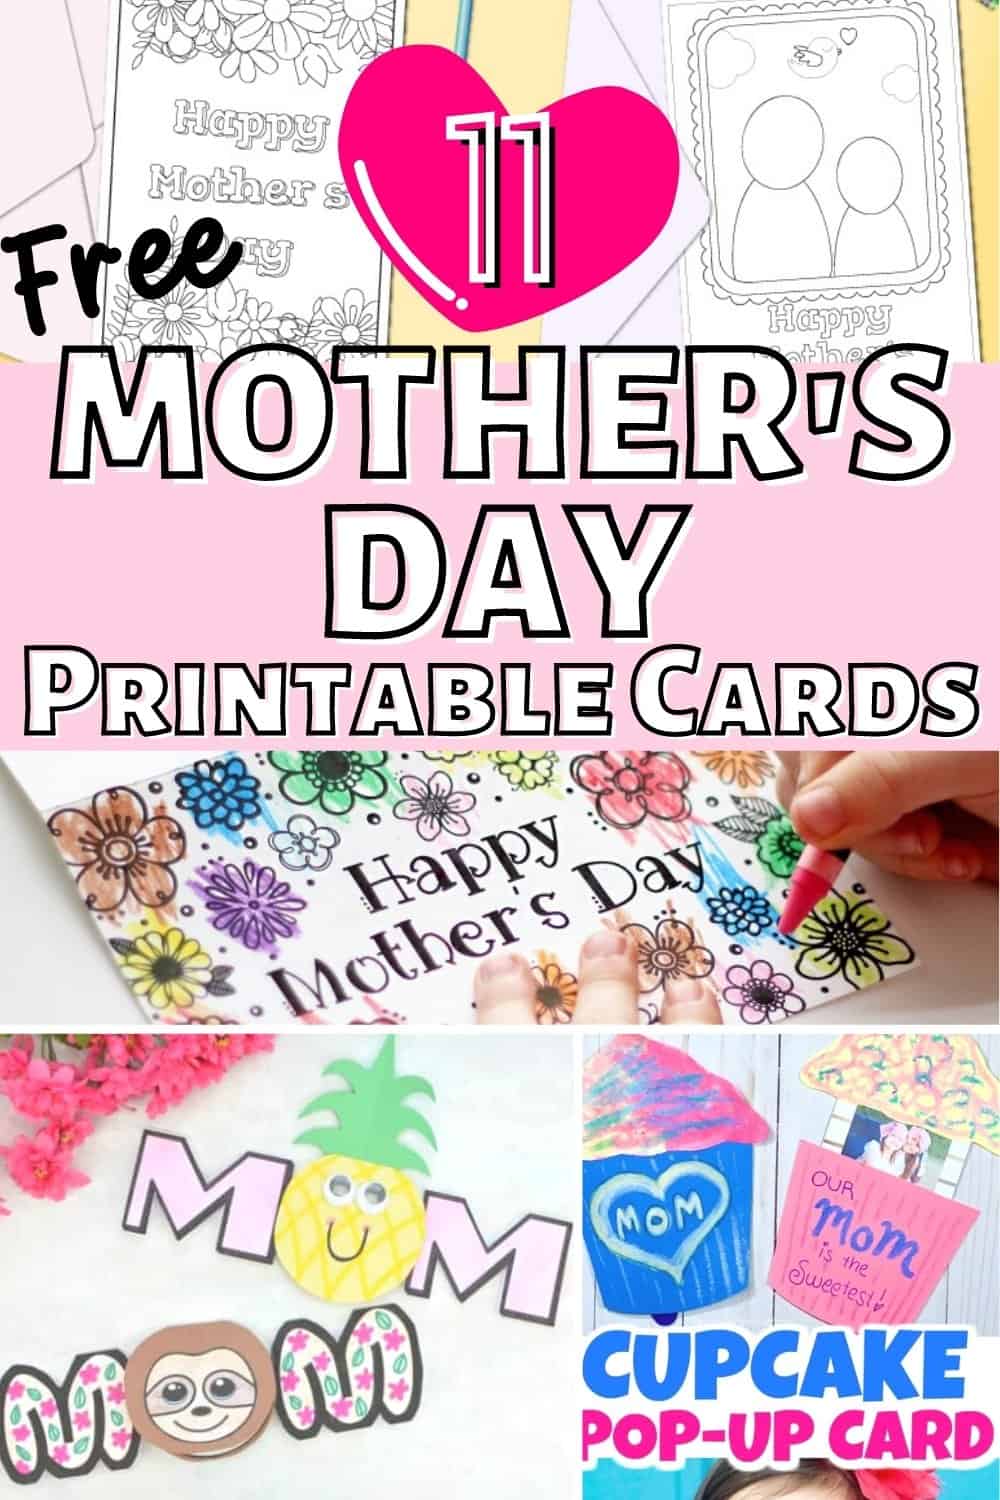 11 Cute Mother’s Day Printable Cards (Free Templates)